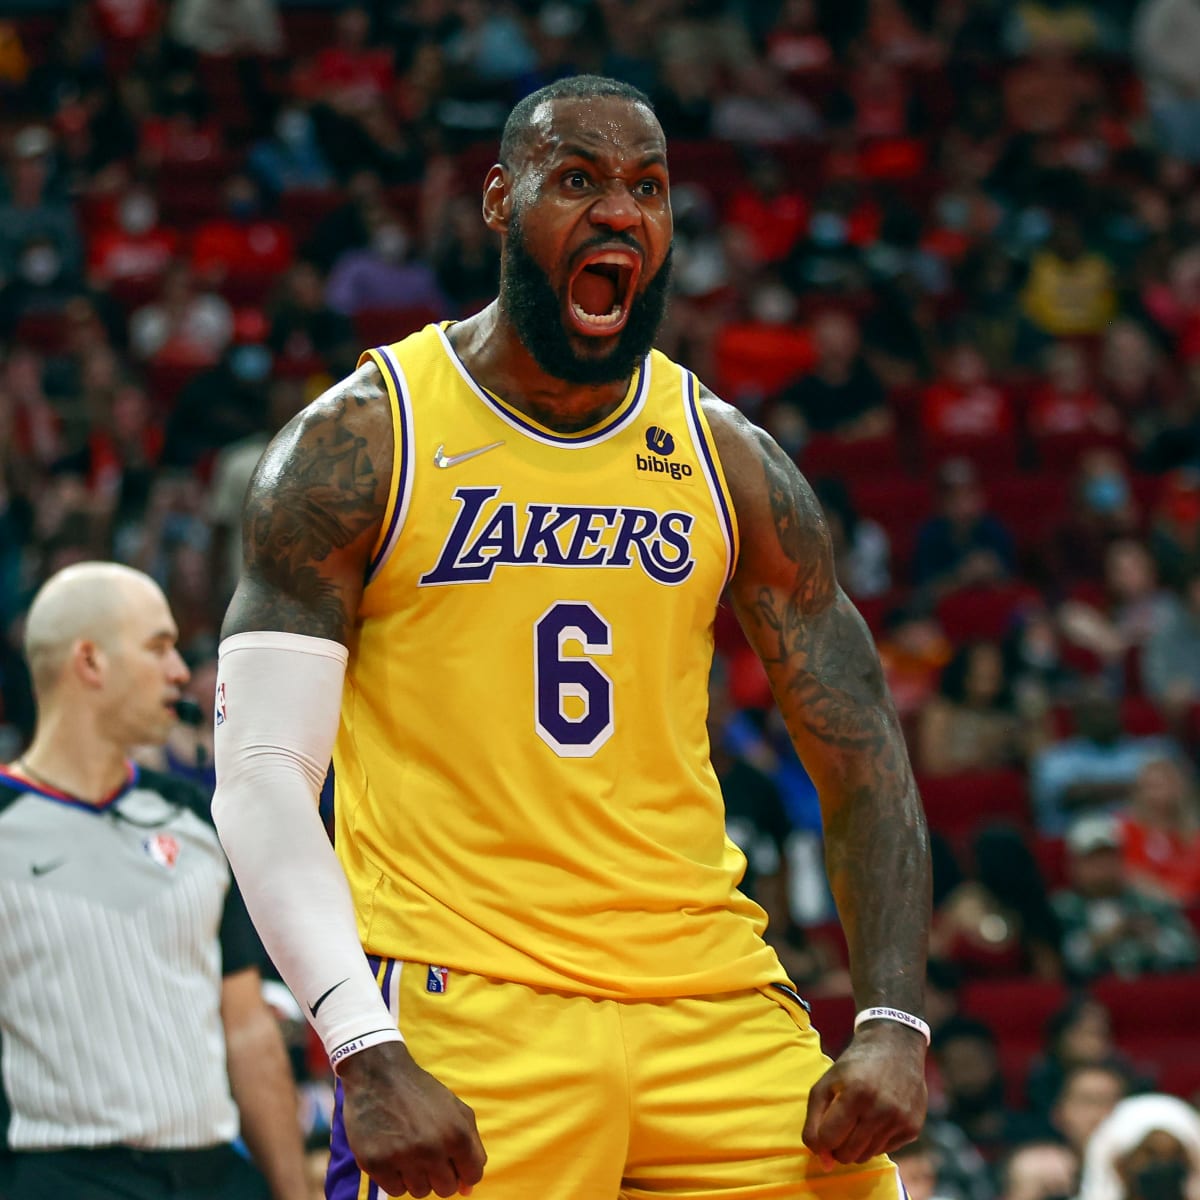 LeBron James' 22-20 night leads Lakers over Grizzlies in OT